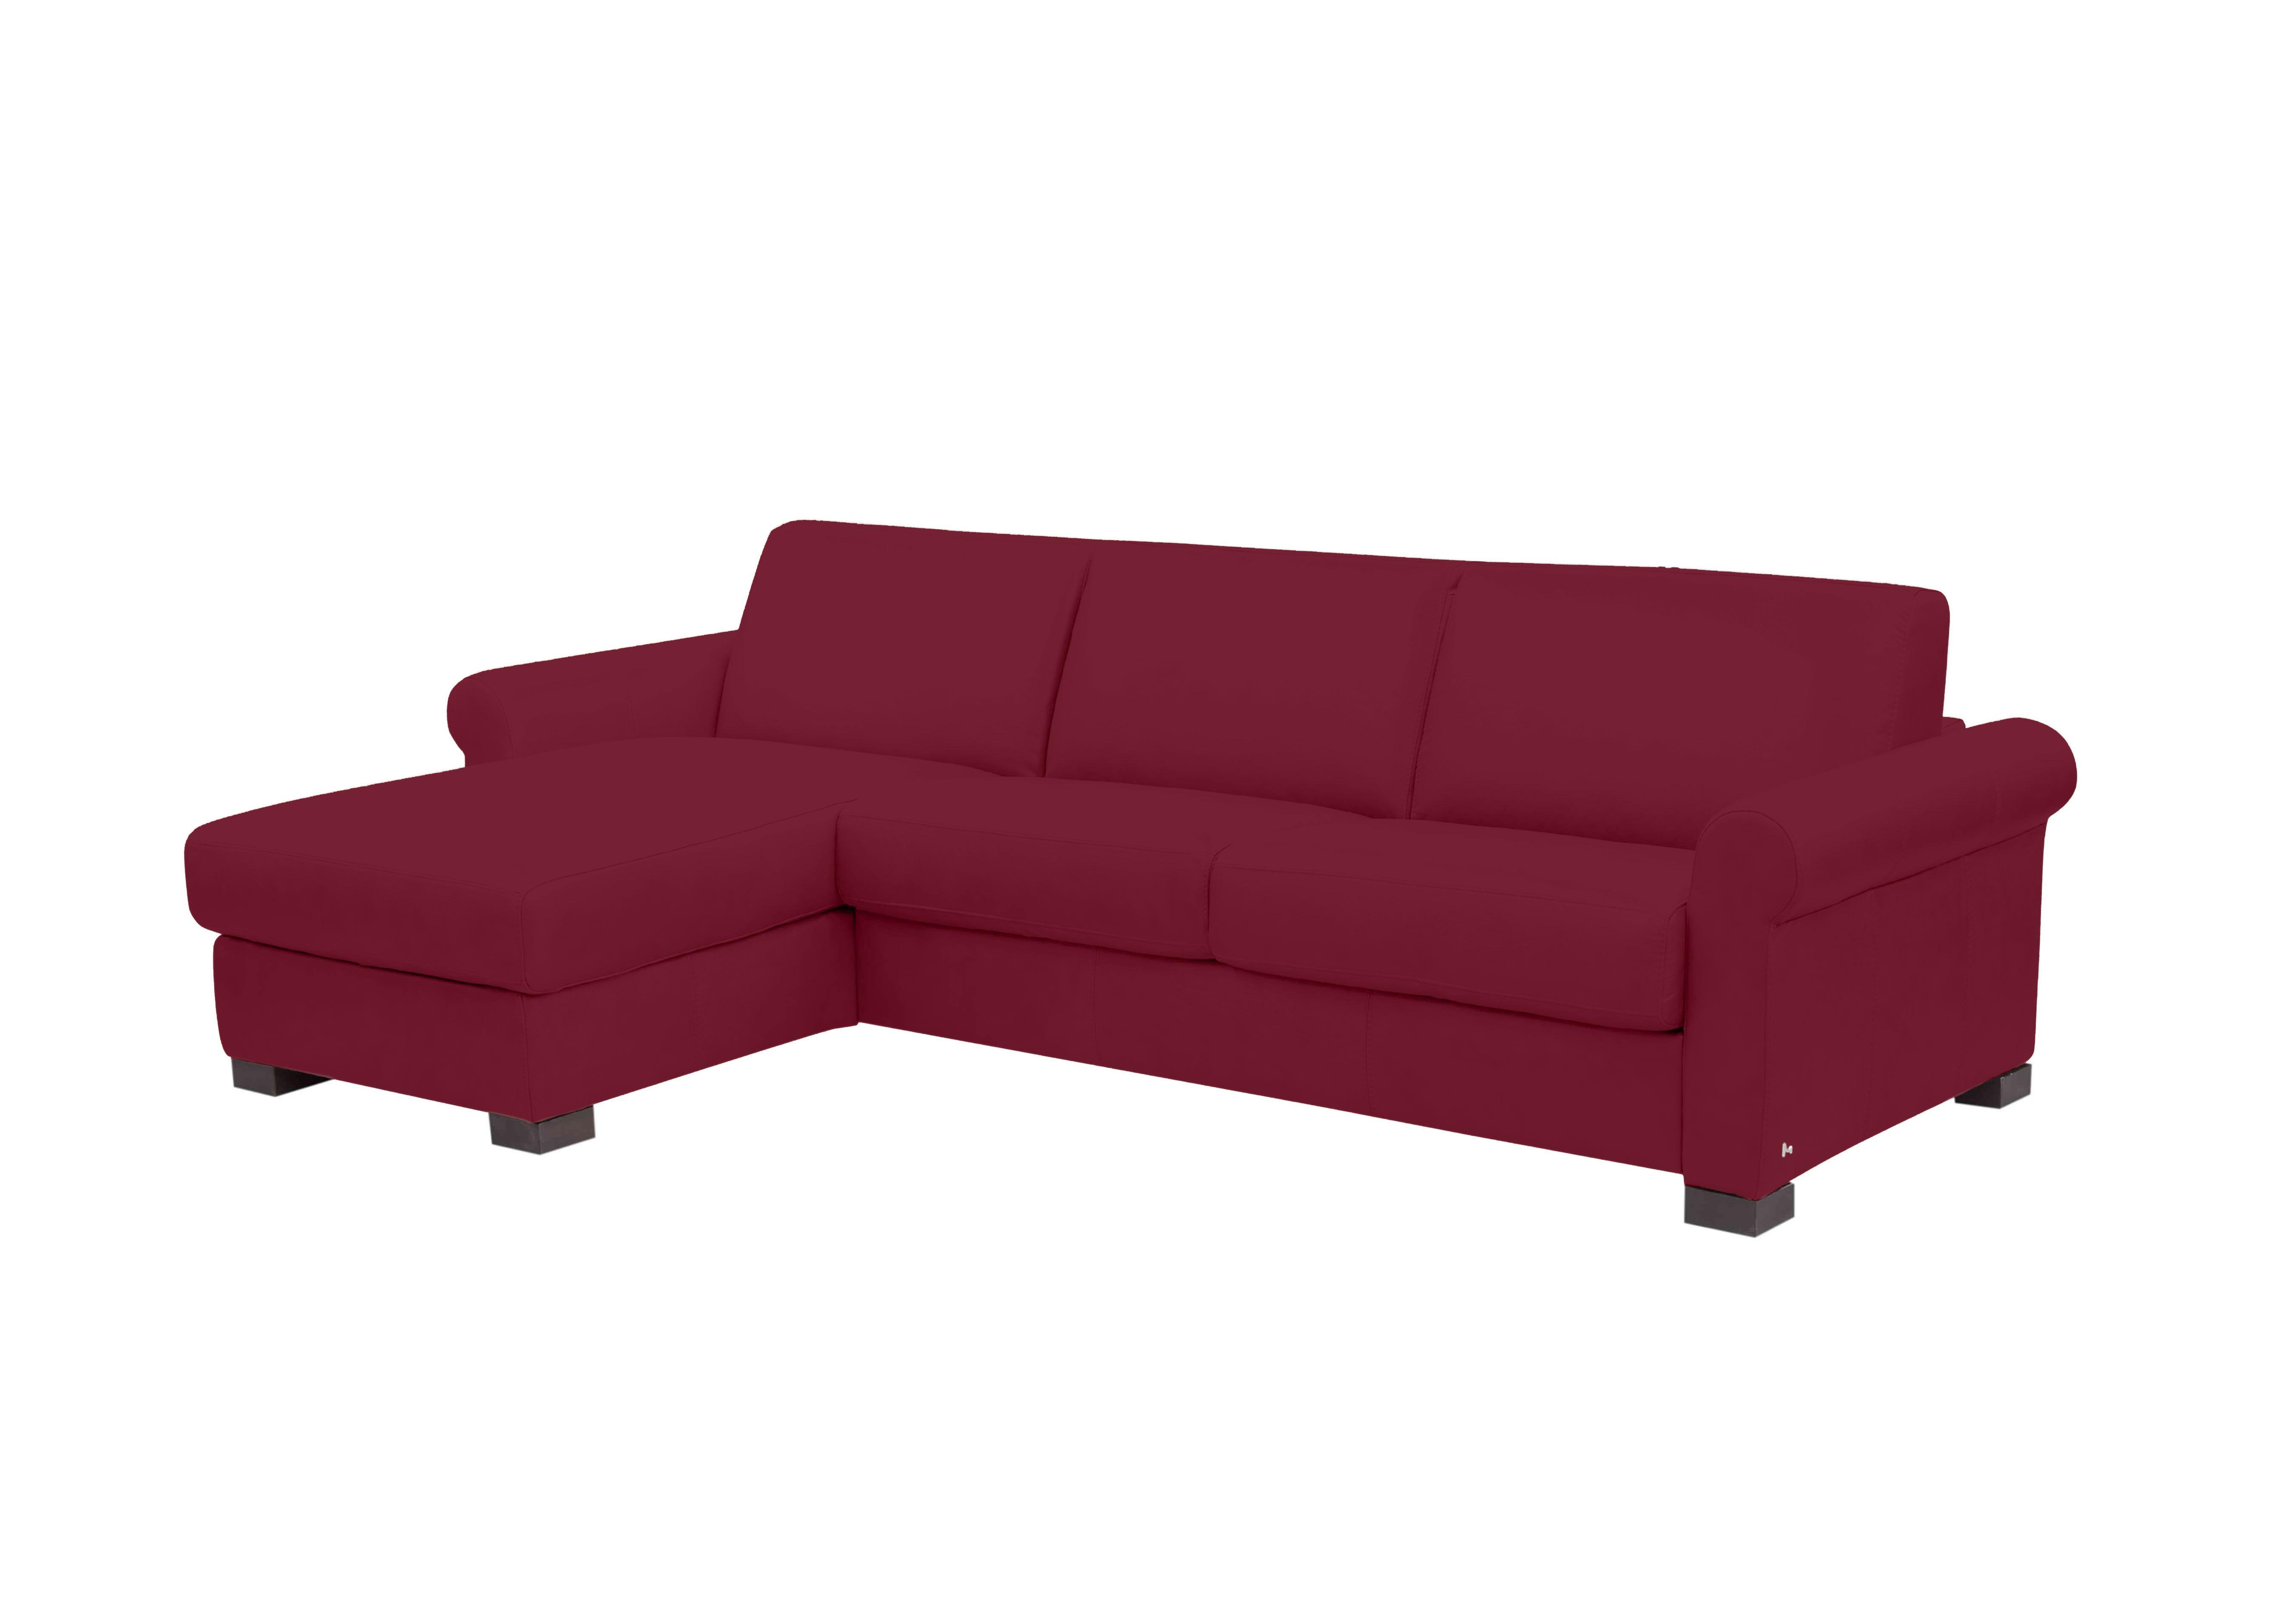 Alcova 3 Seater Leather Sofa Bed with Storage Chaise with Scroll Arms in Dali Bordeaux 1521 on Furniture Village